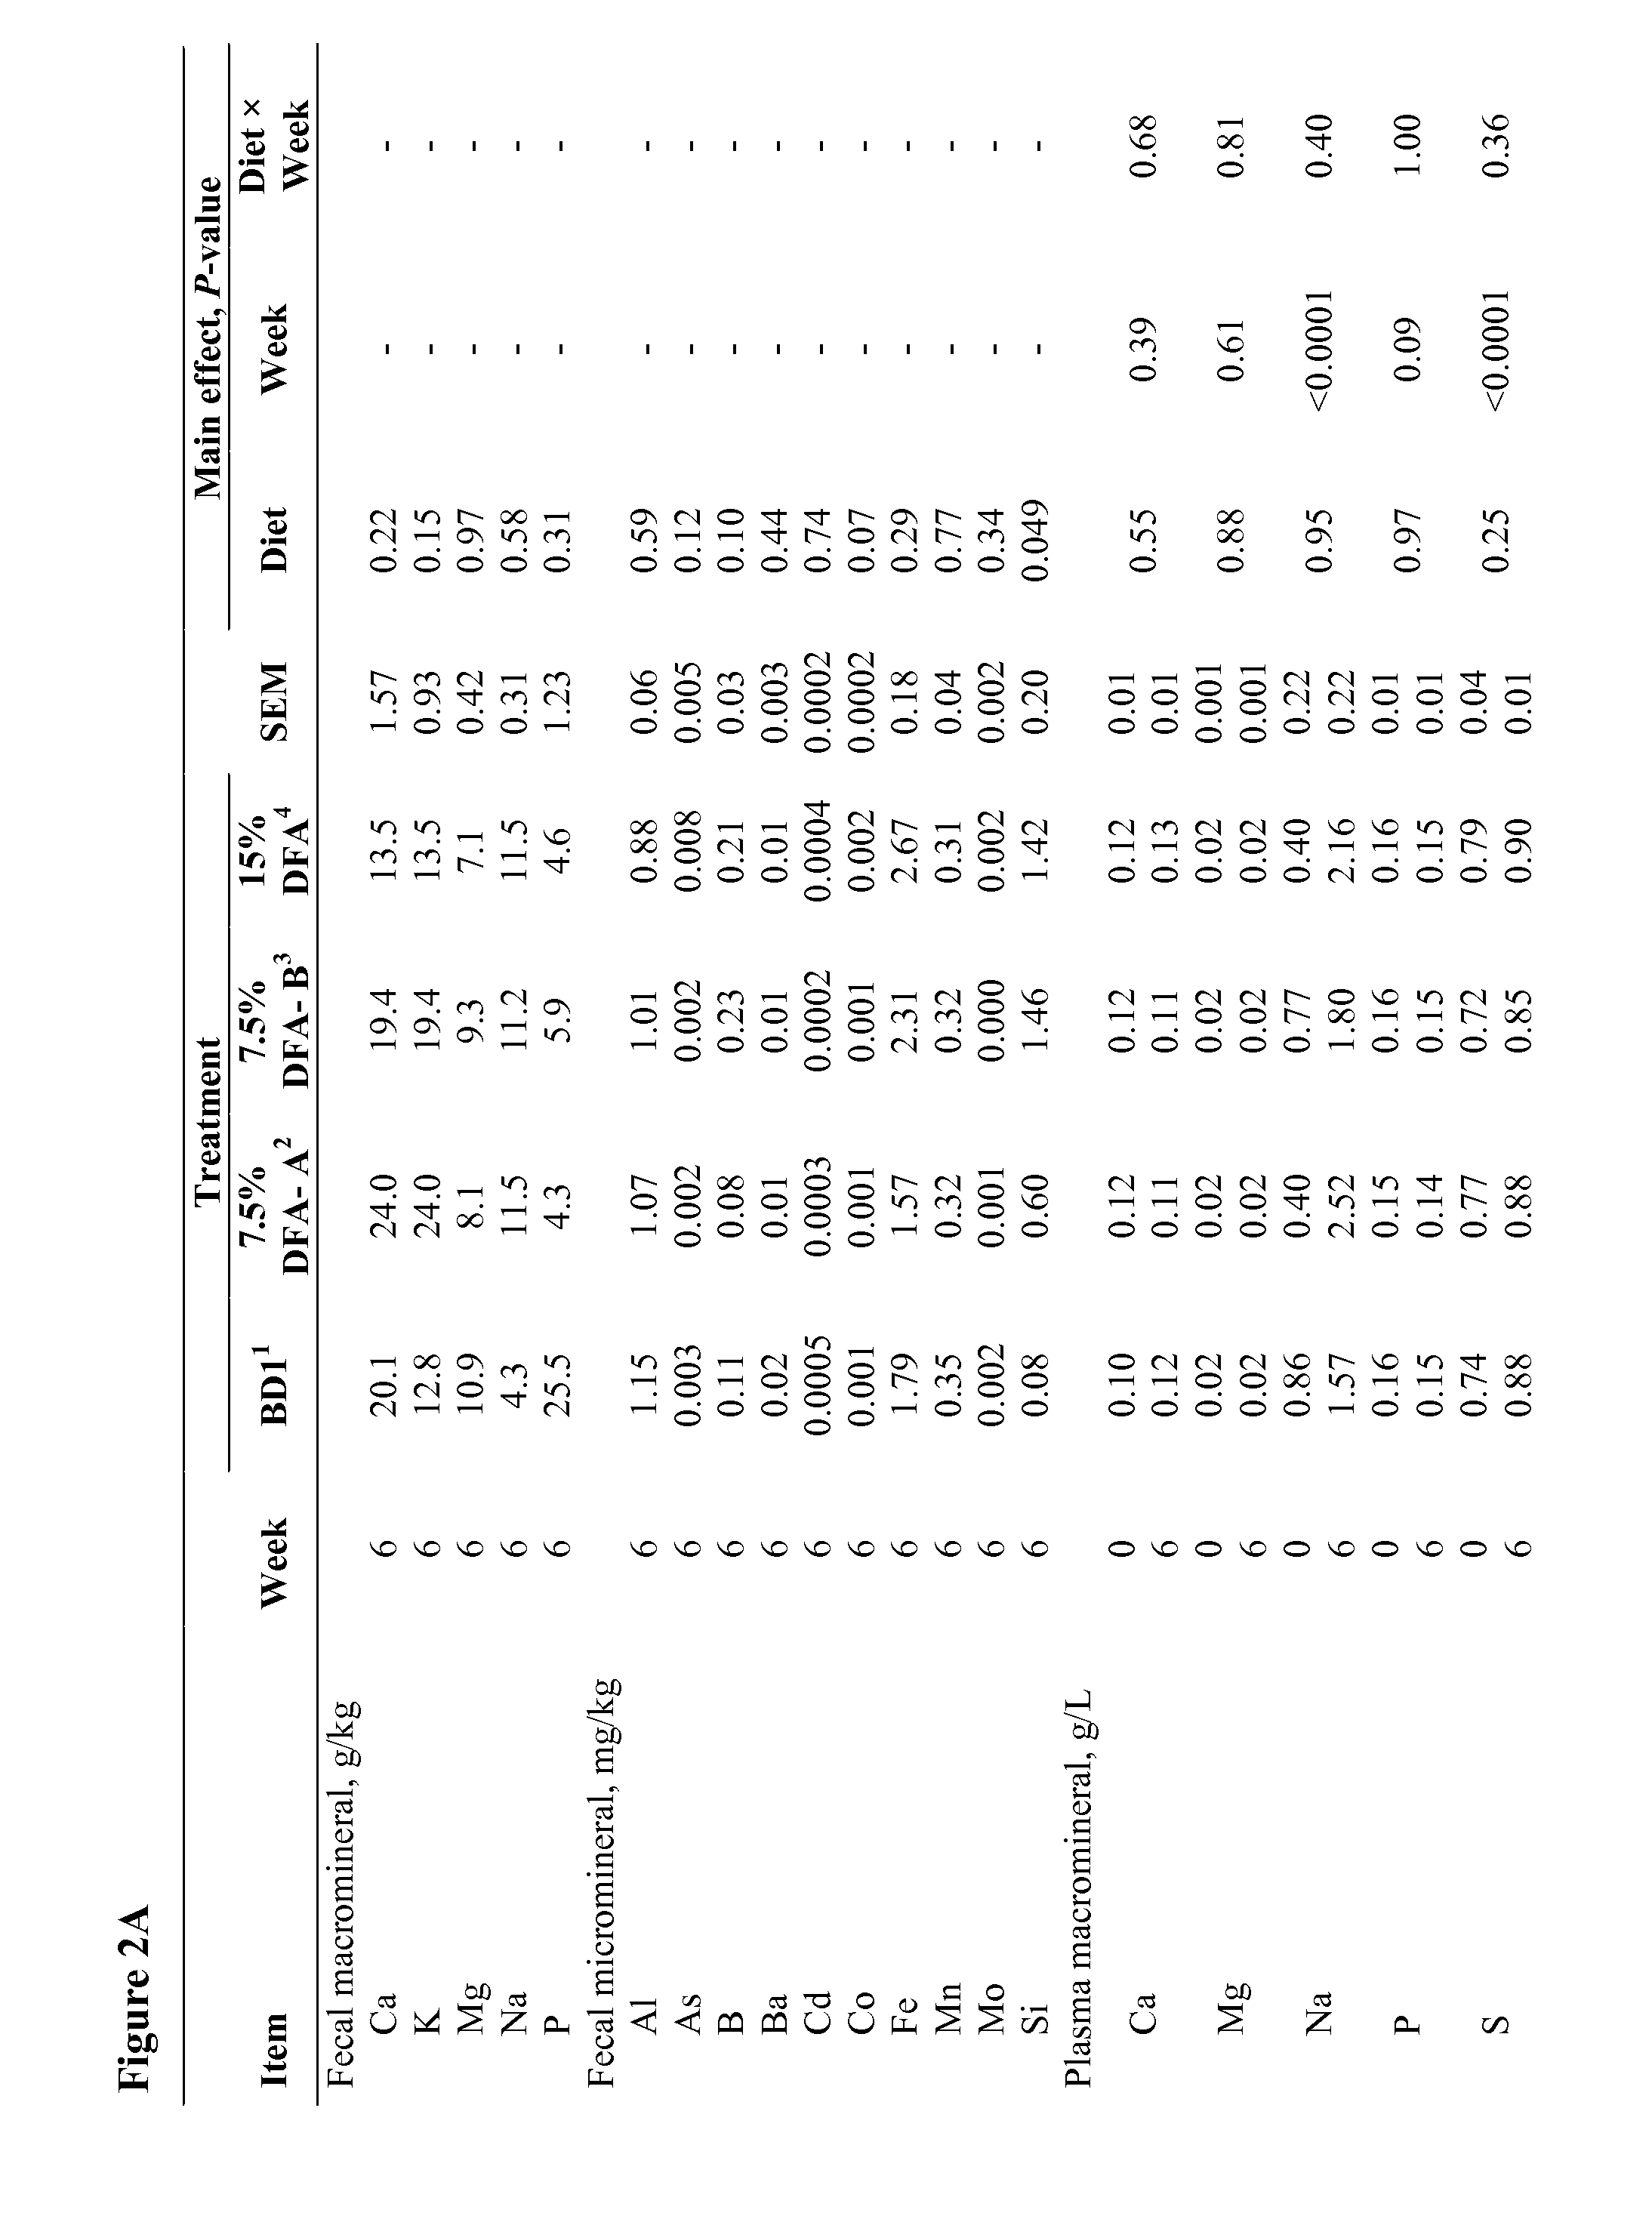 Algal-based animal feed composition, animal feed supplement, and uses thereof